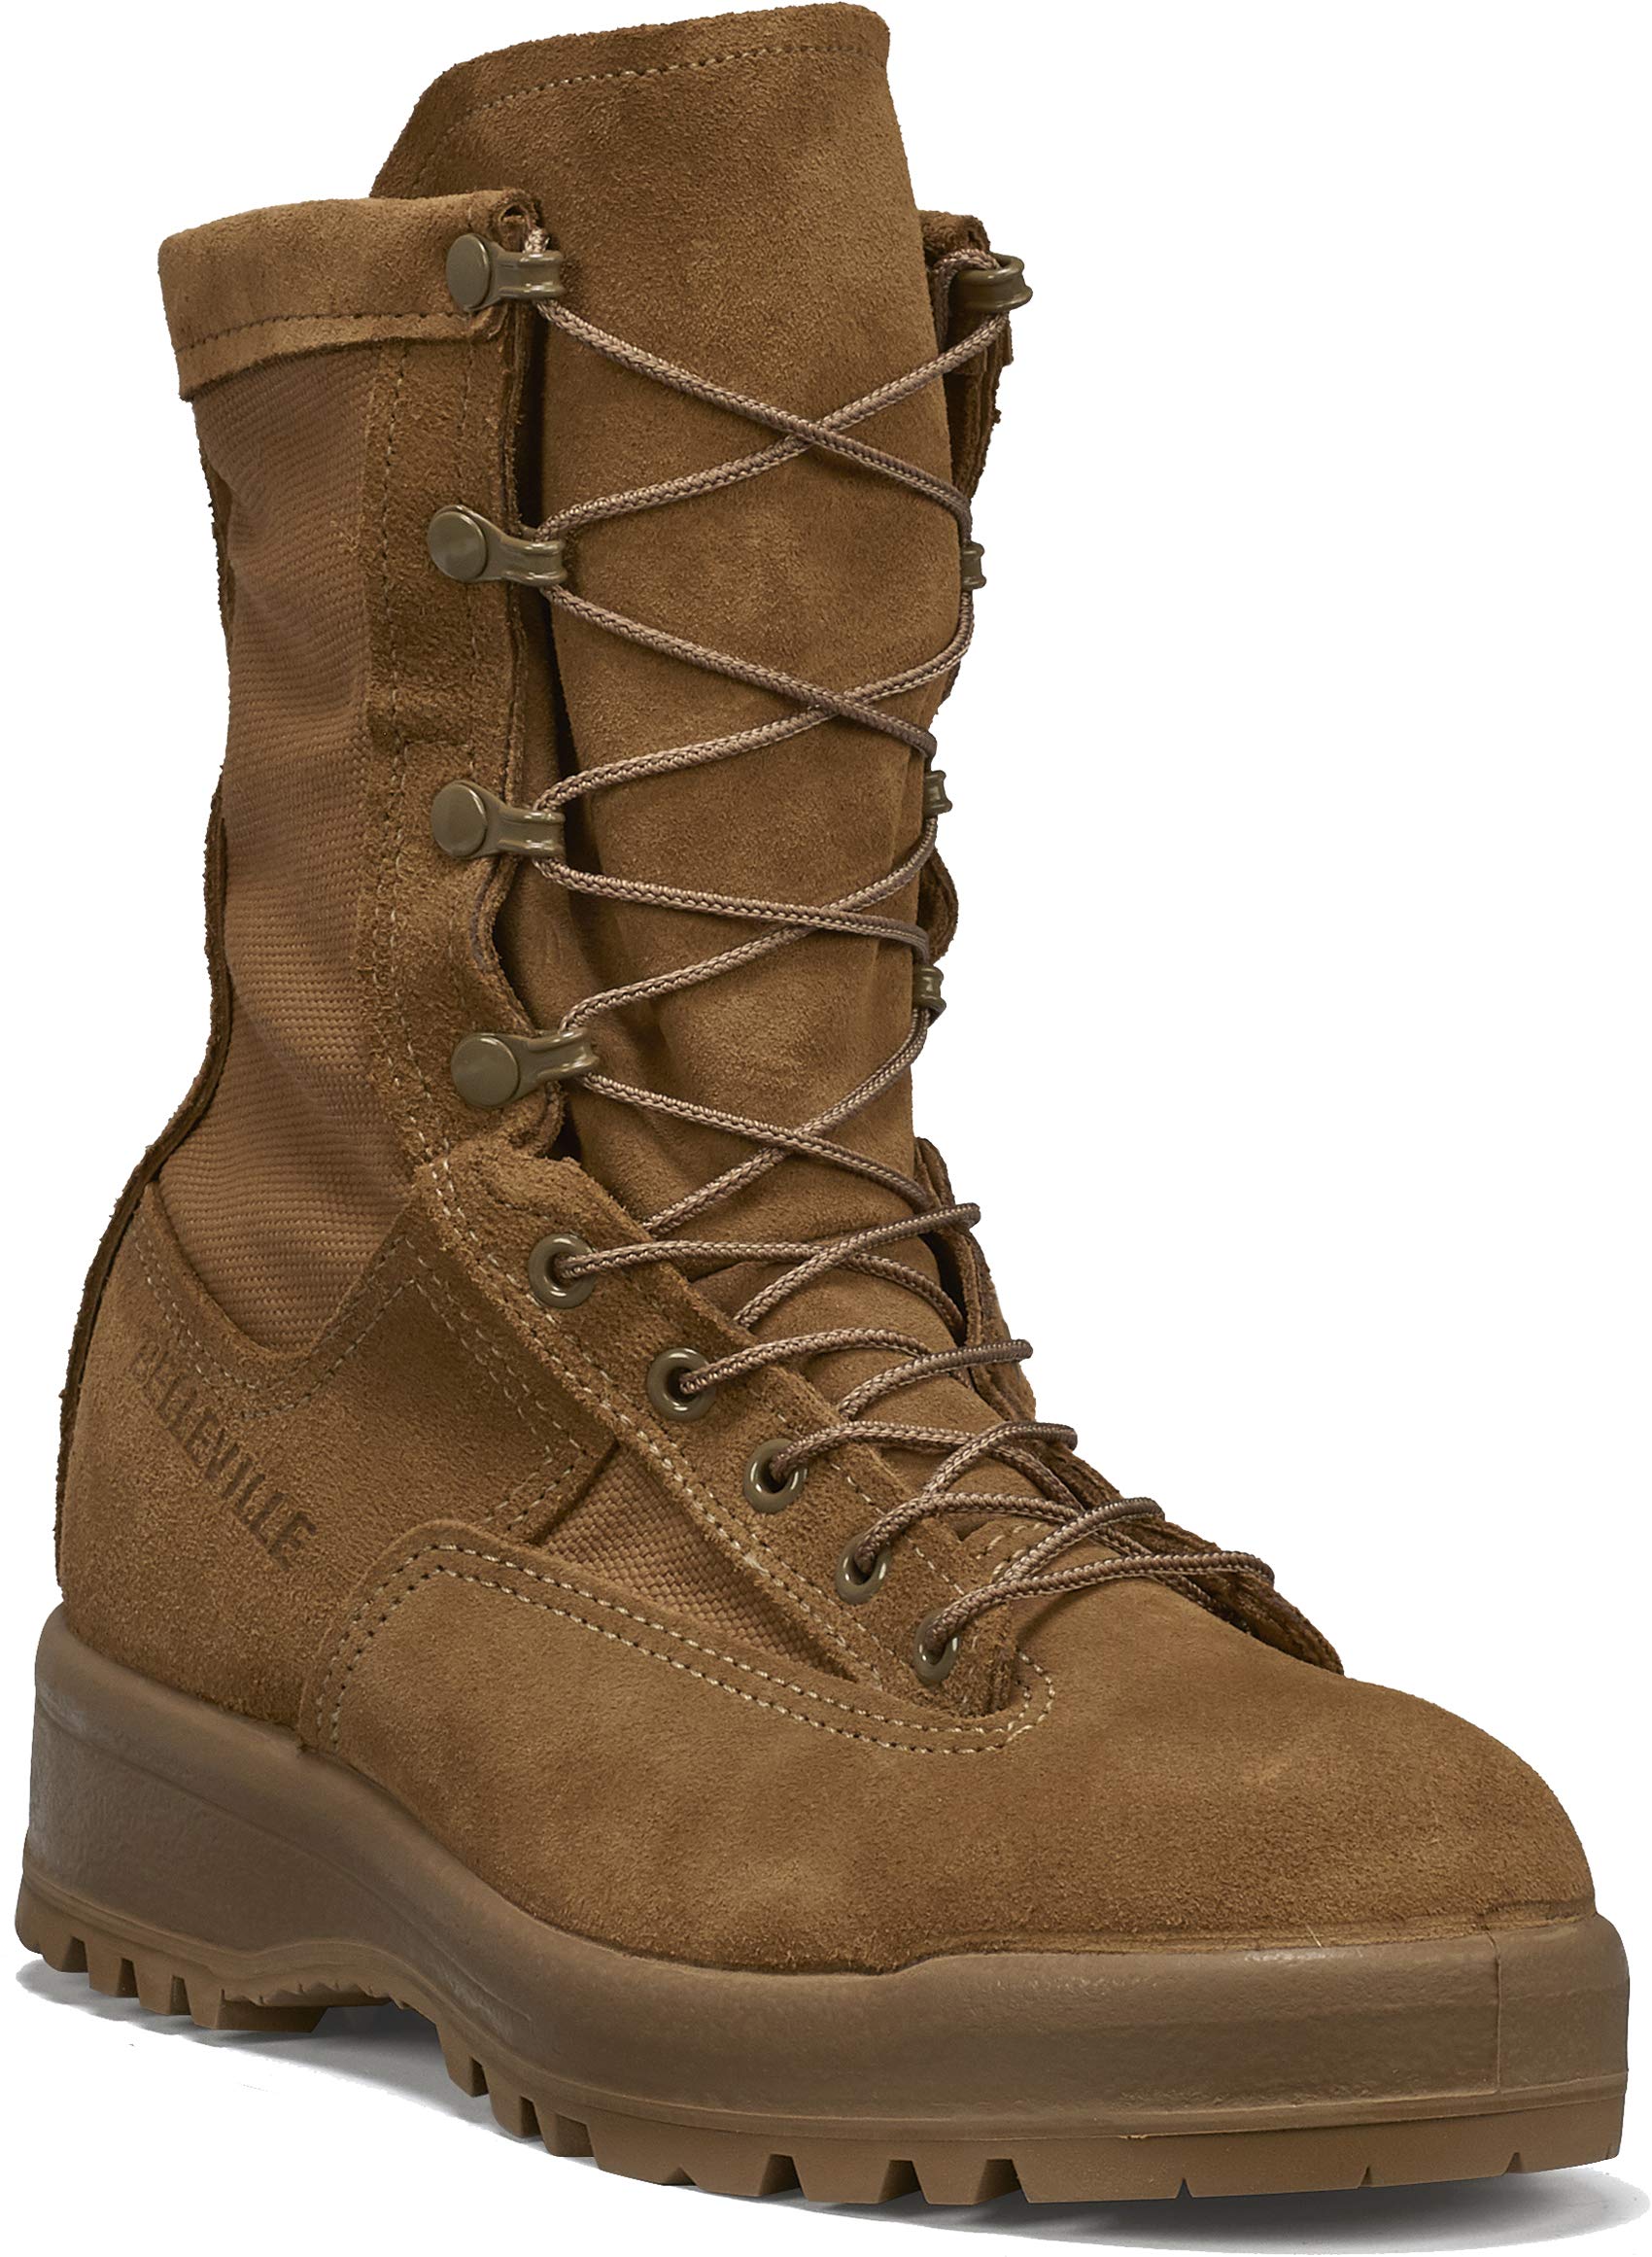 Mua Belleville C790 ST 8” Waterproof Steel Toe Flight and Combat Boots for  Men - AR 670-1/AFI 36-2903 Army/USAF Flight Approved Coyote Brown with  Vibram Outsole; Berry Compliant trên Amazon Mỹ chính